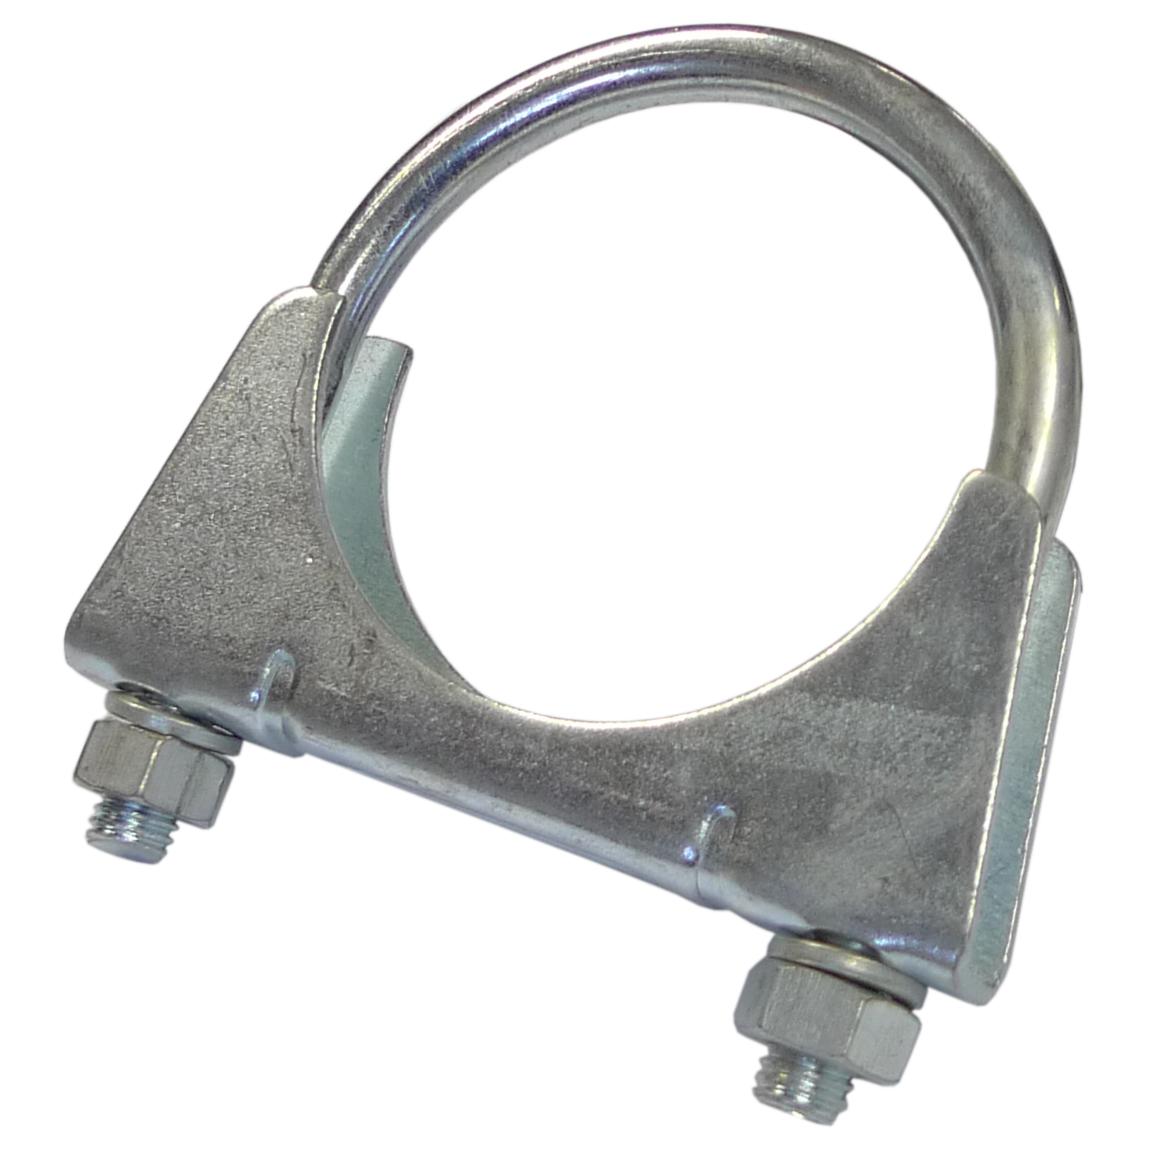 Imperial 90776 Heavy-duty Support Clamp 3/4 